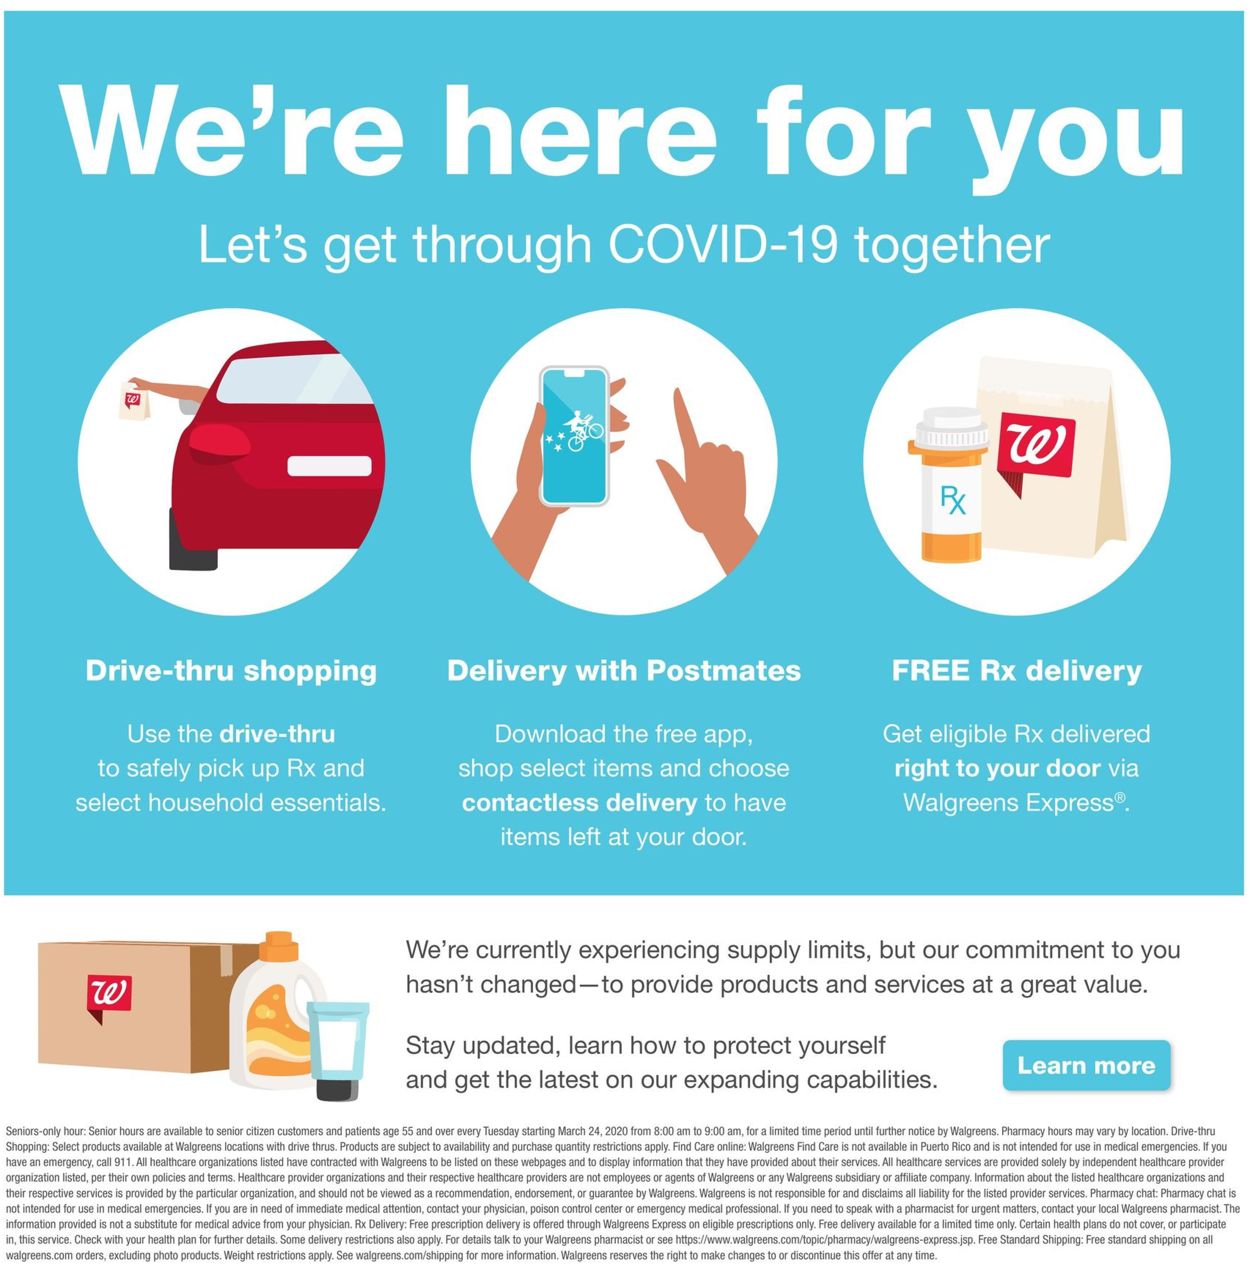 Walgreens Ad from 04/12/2020